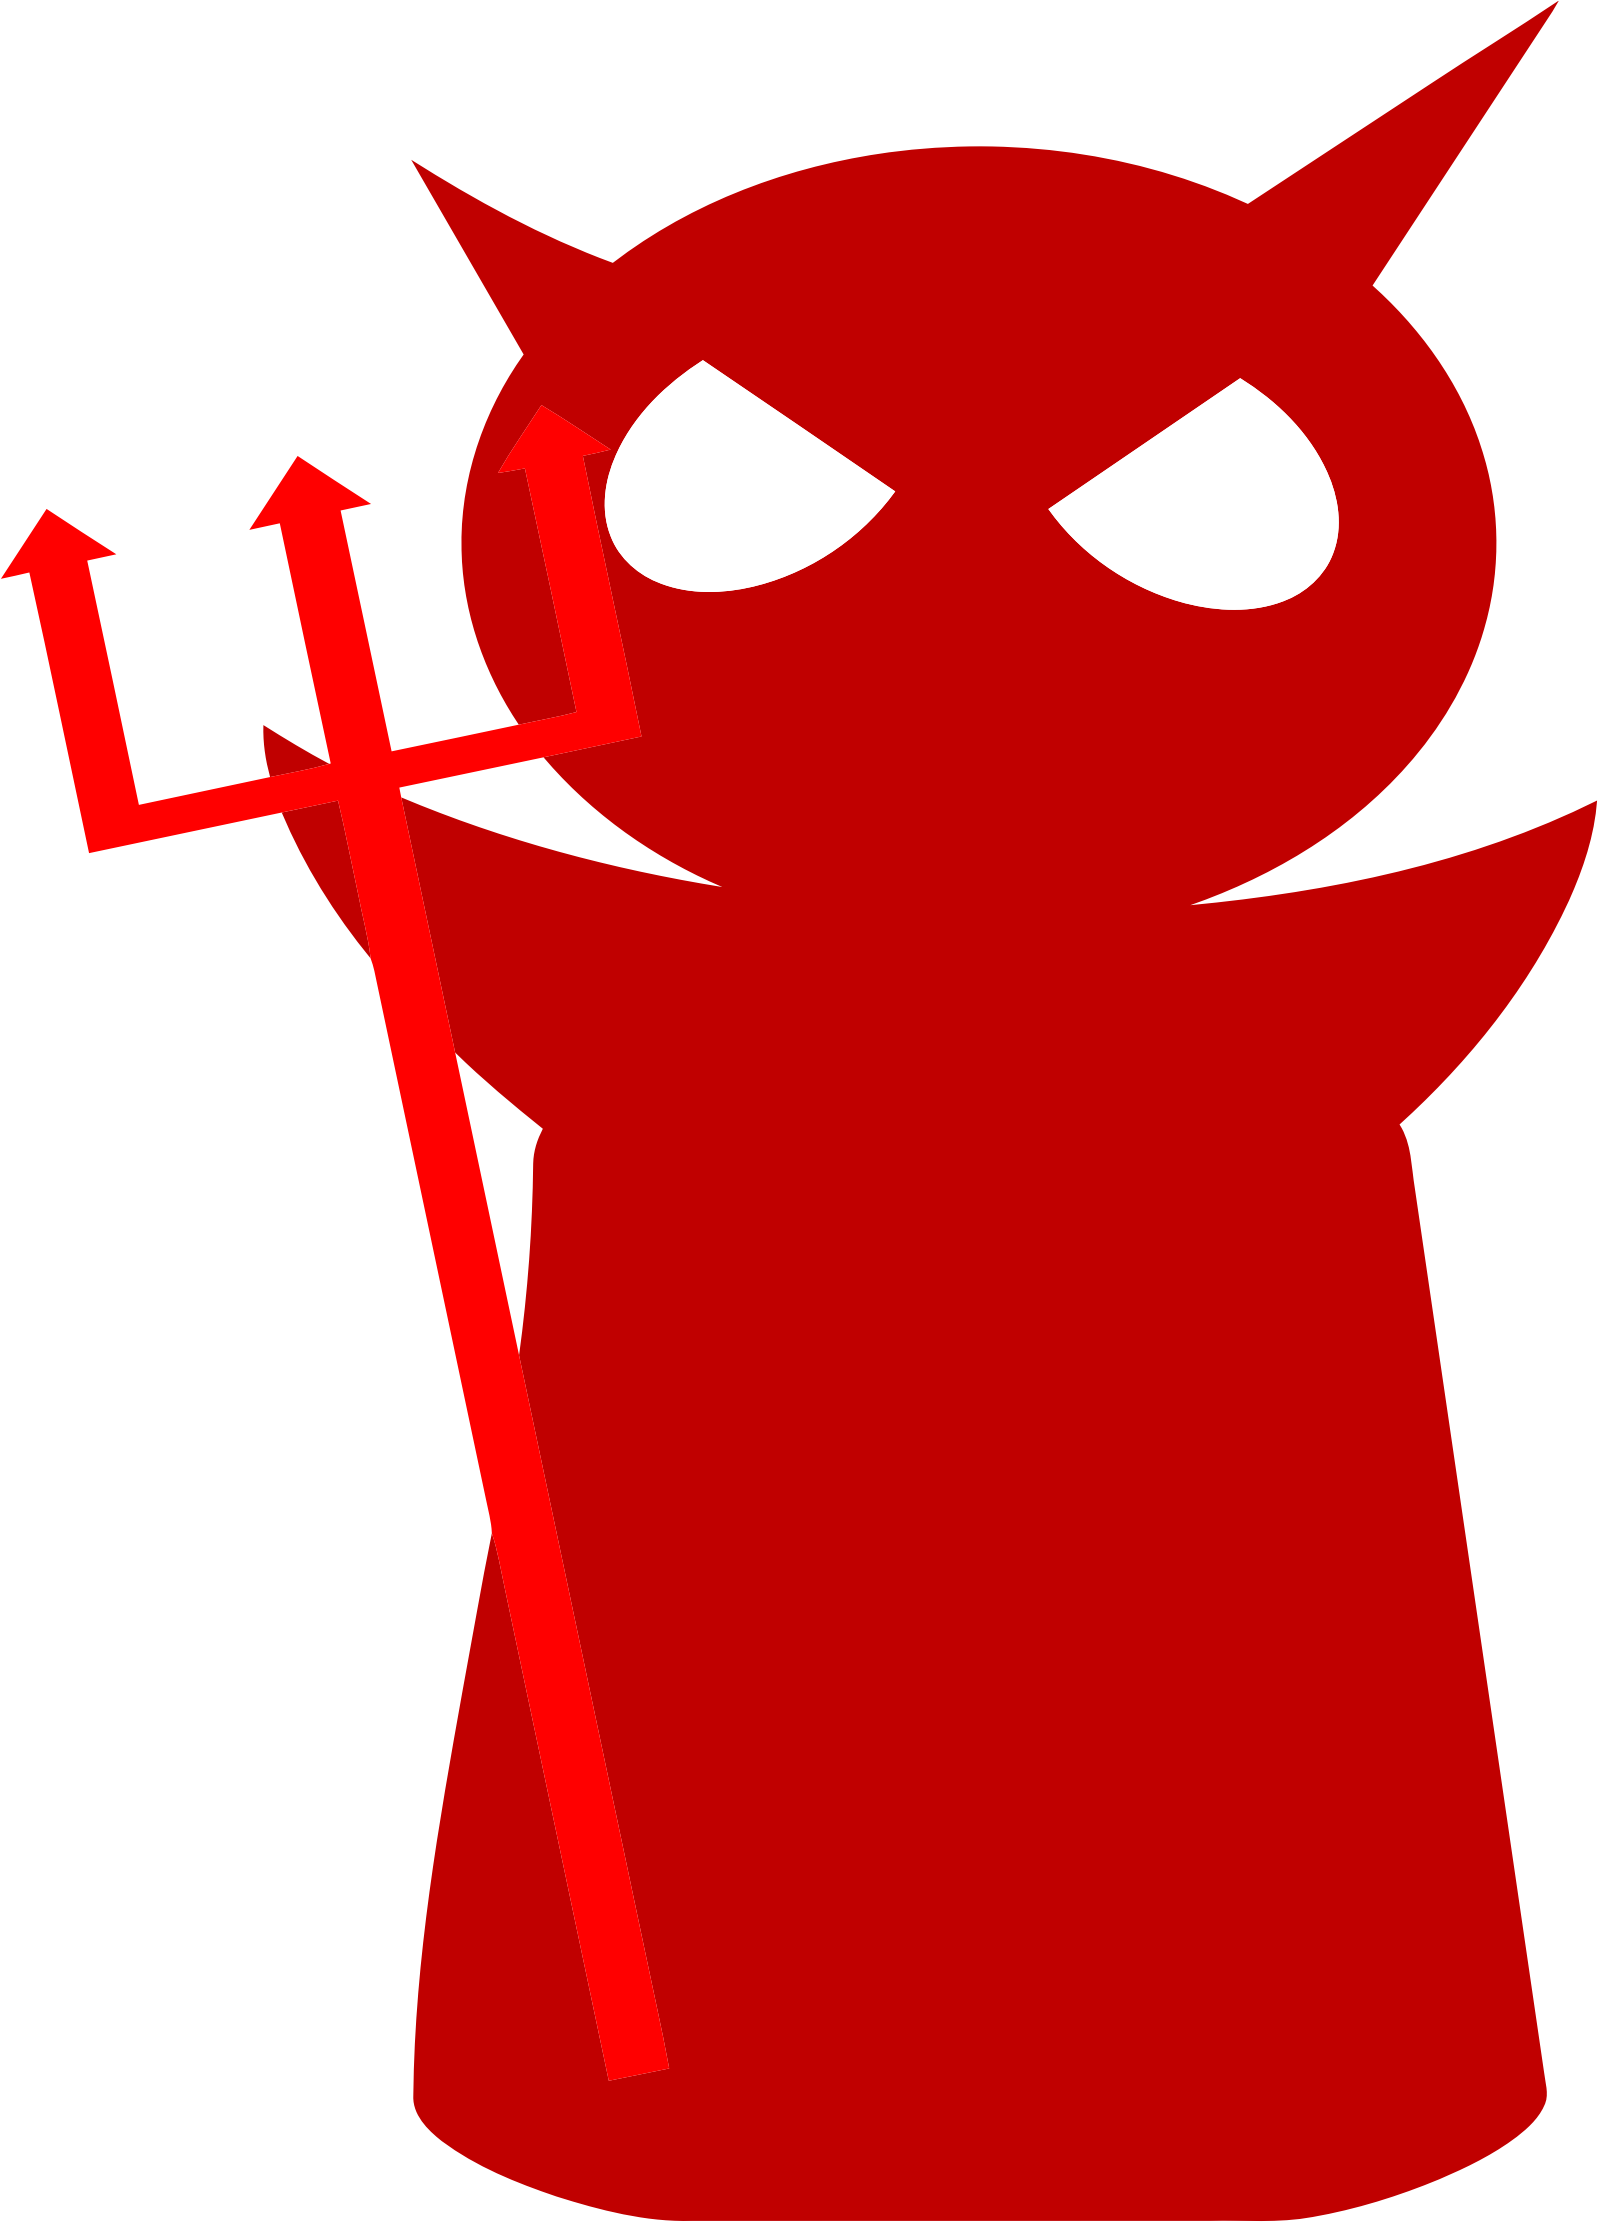 Halo clipart devil. Demon red free on